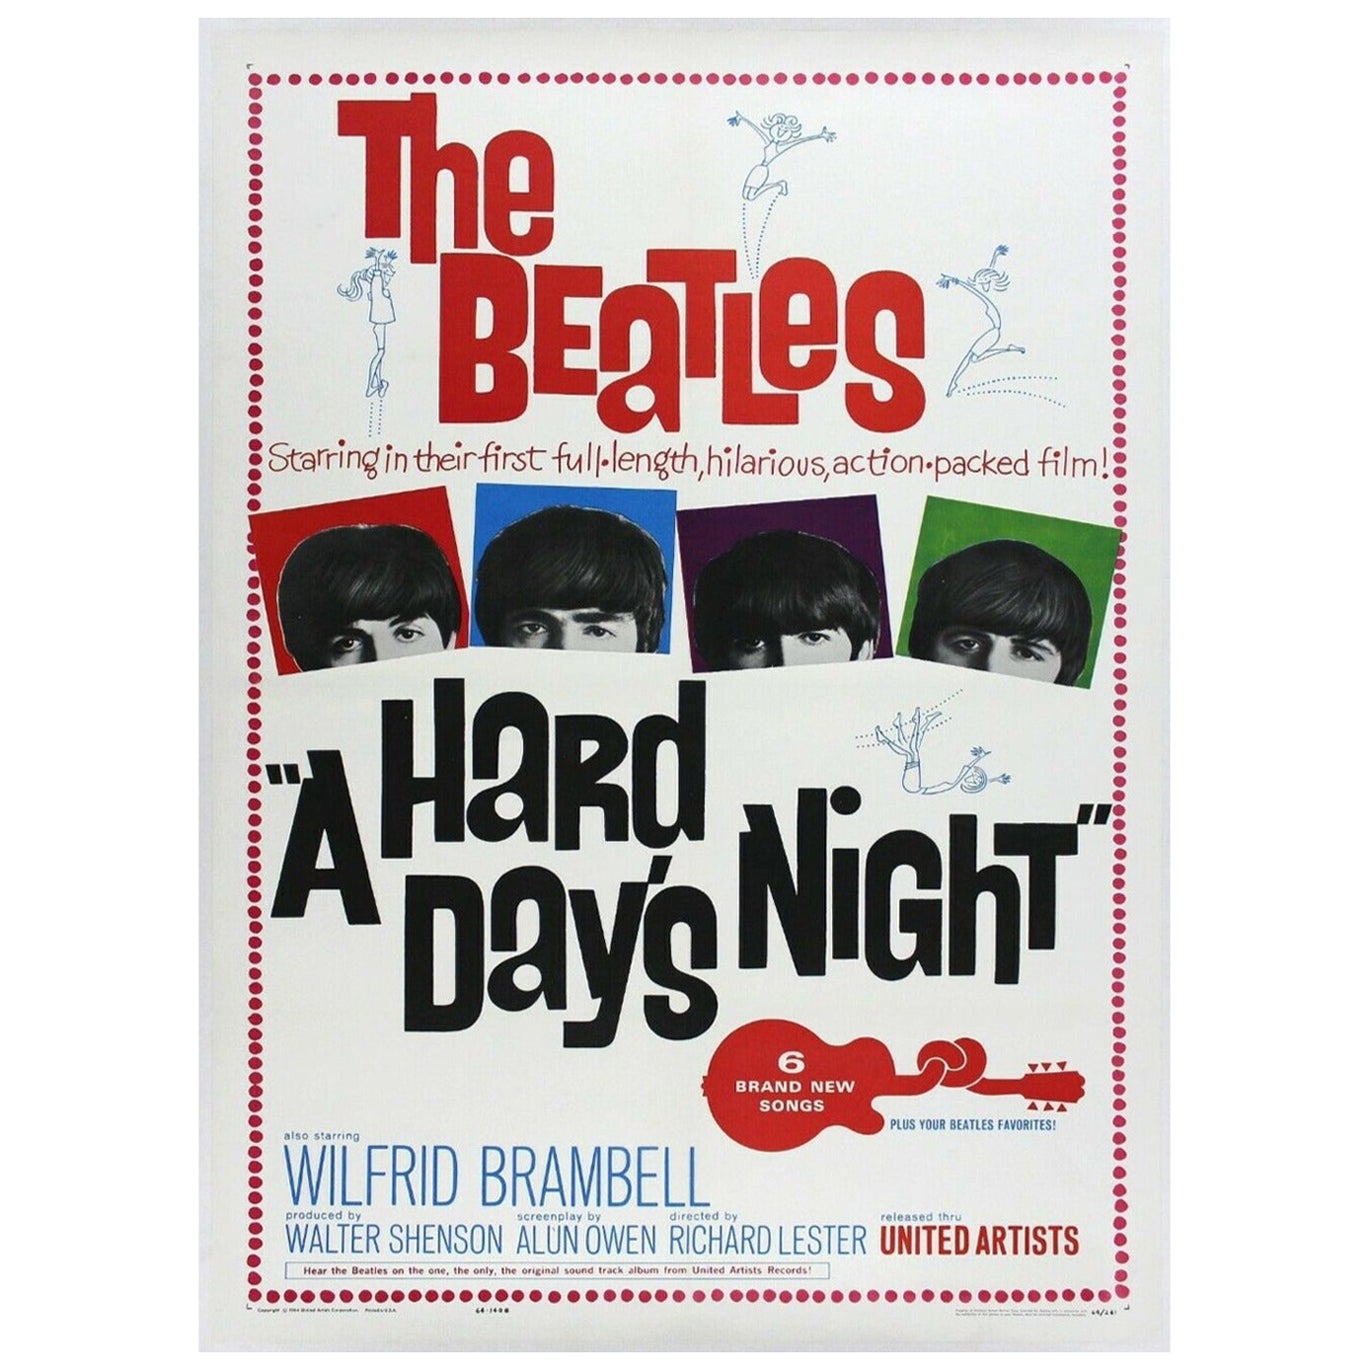 1965 The Beatles - A Hard Day's Night Original Vintage Poster For Sale